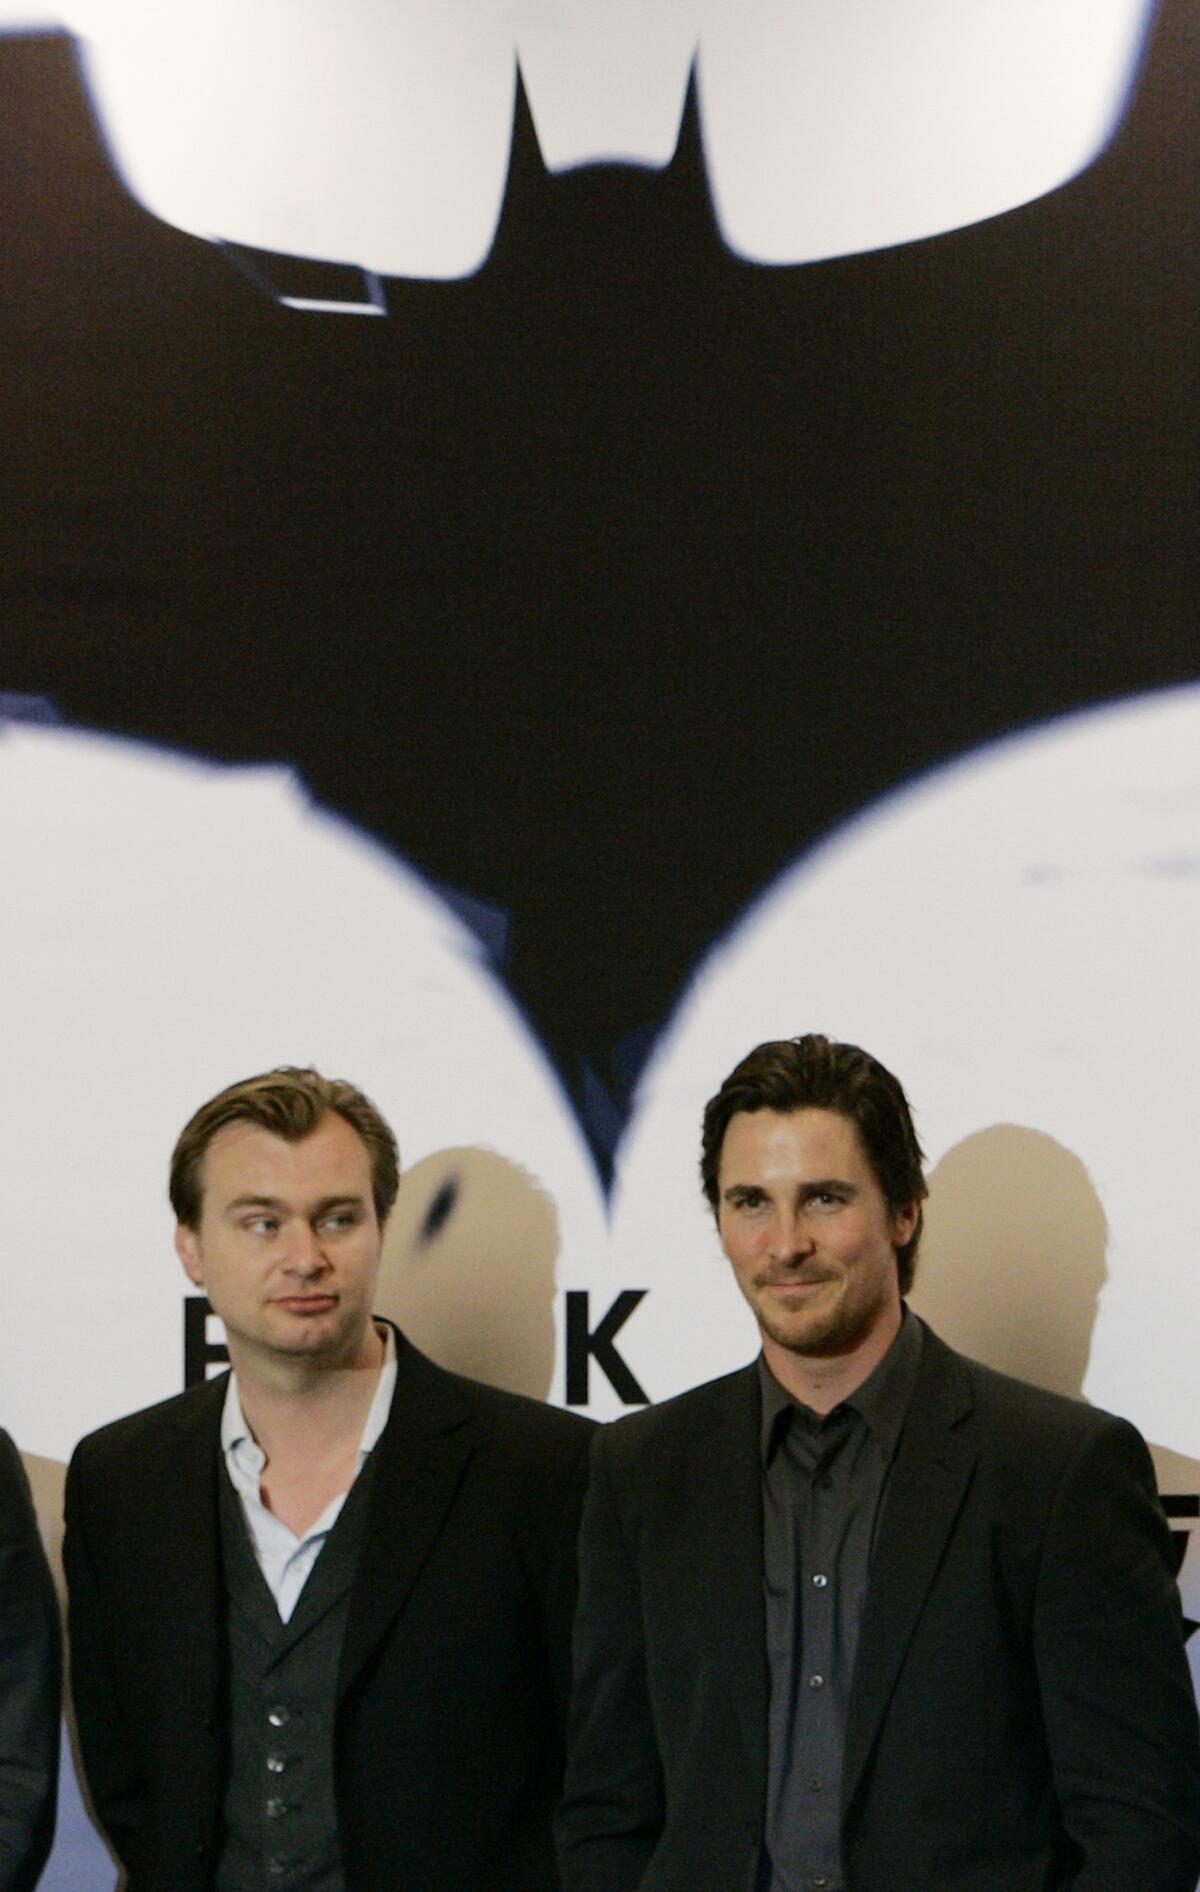 Actor Christian Bale, right, and director Christopher Nolan pose during a news conference for "The Dark Knight" in Hong Kong.